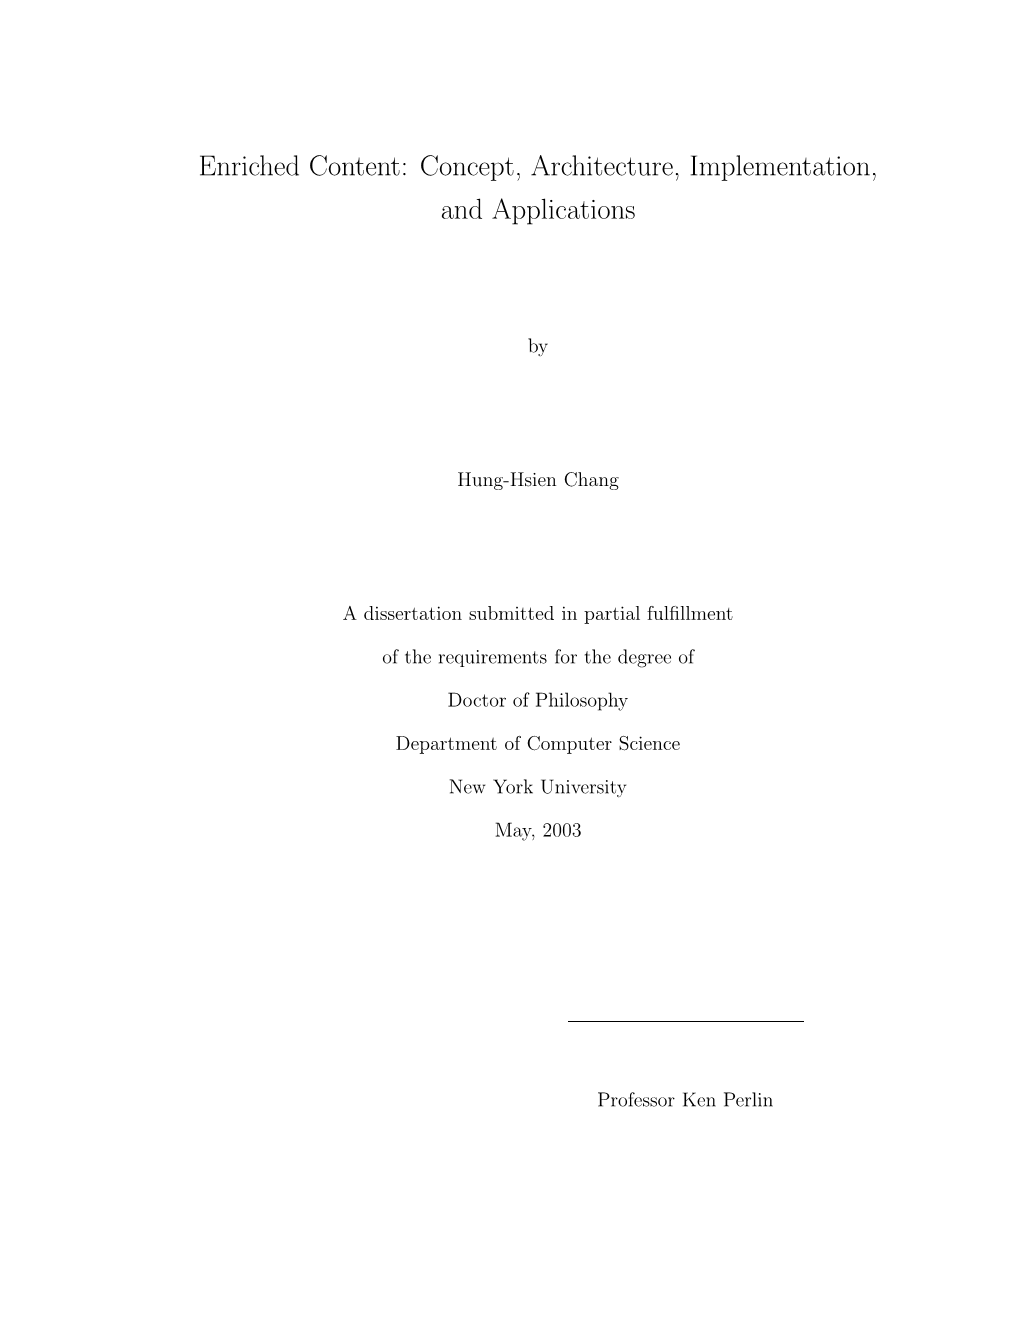 Enriched Content: Concept, Architecture, Implementation, and Applications